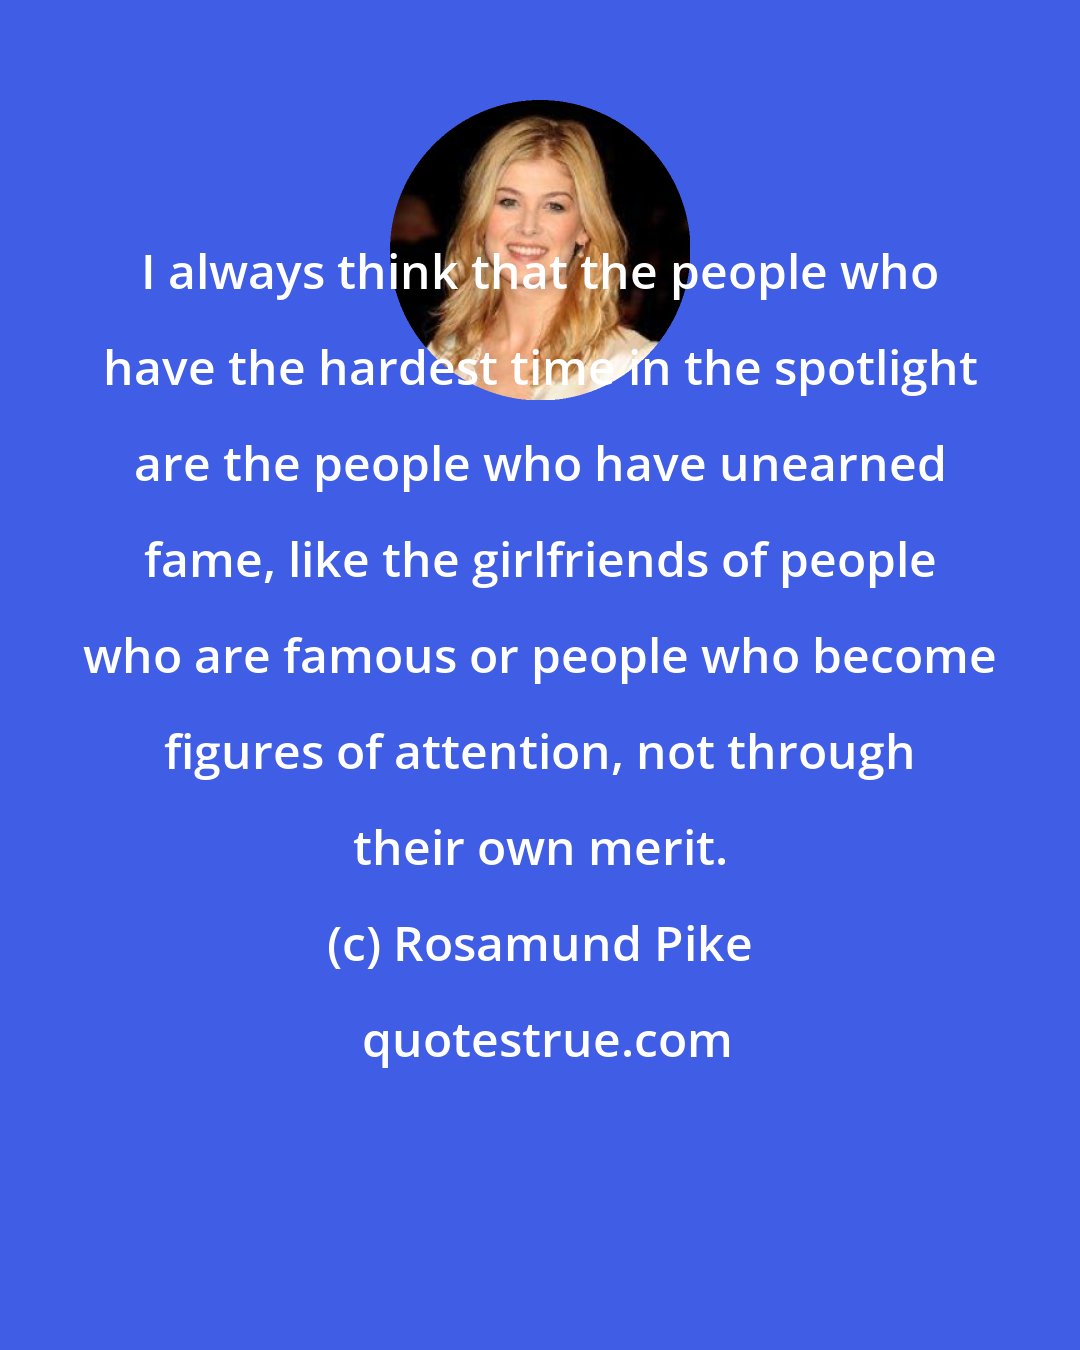 Rosamund Pike: I always think that the people who have the hardest time in the spotlight are the people who have unearned fame, like the girlfriends of people who are famous or people who become figures of attention, not through their own merit.